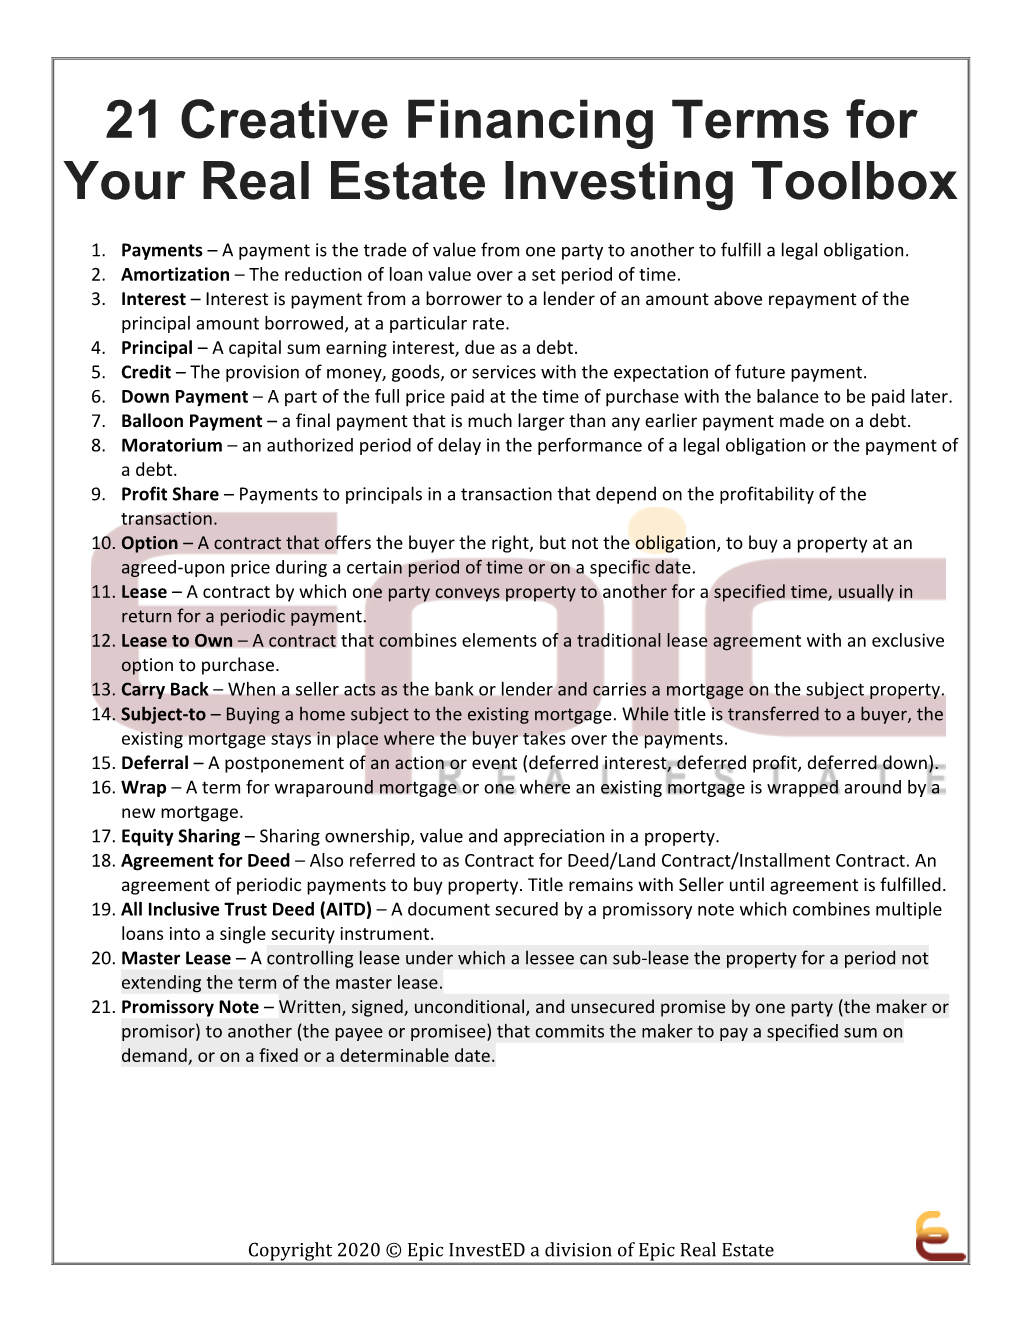 21 Creative Financing Terms for Your Real Estate Investing Toolbox